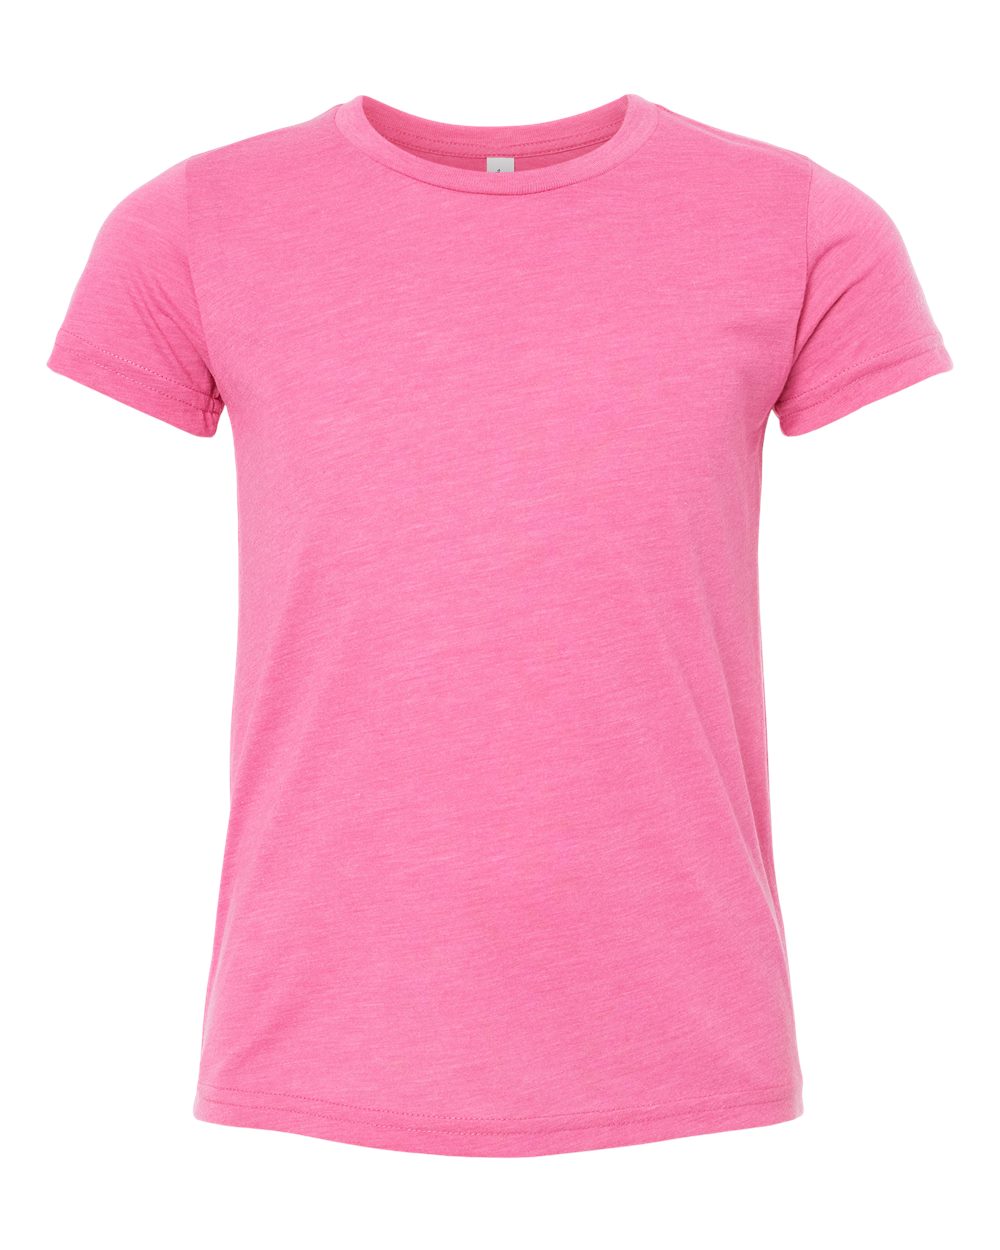 Bella + Canvas Youth Triblend Tee (3413y) in Charity Pink Triblend